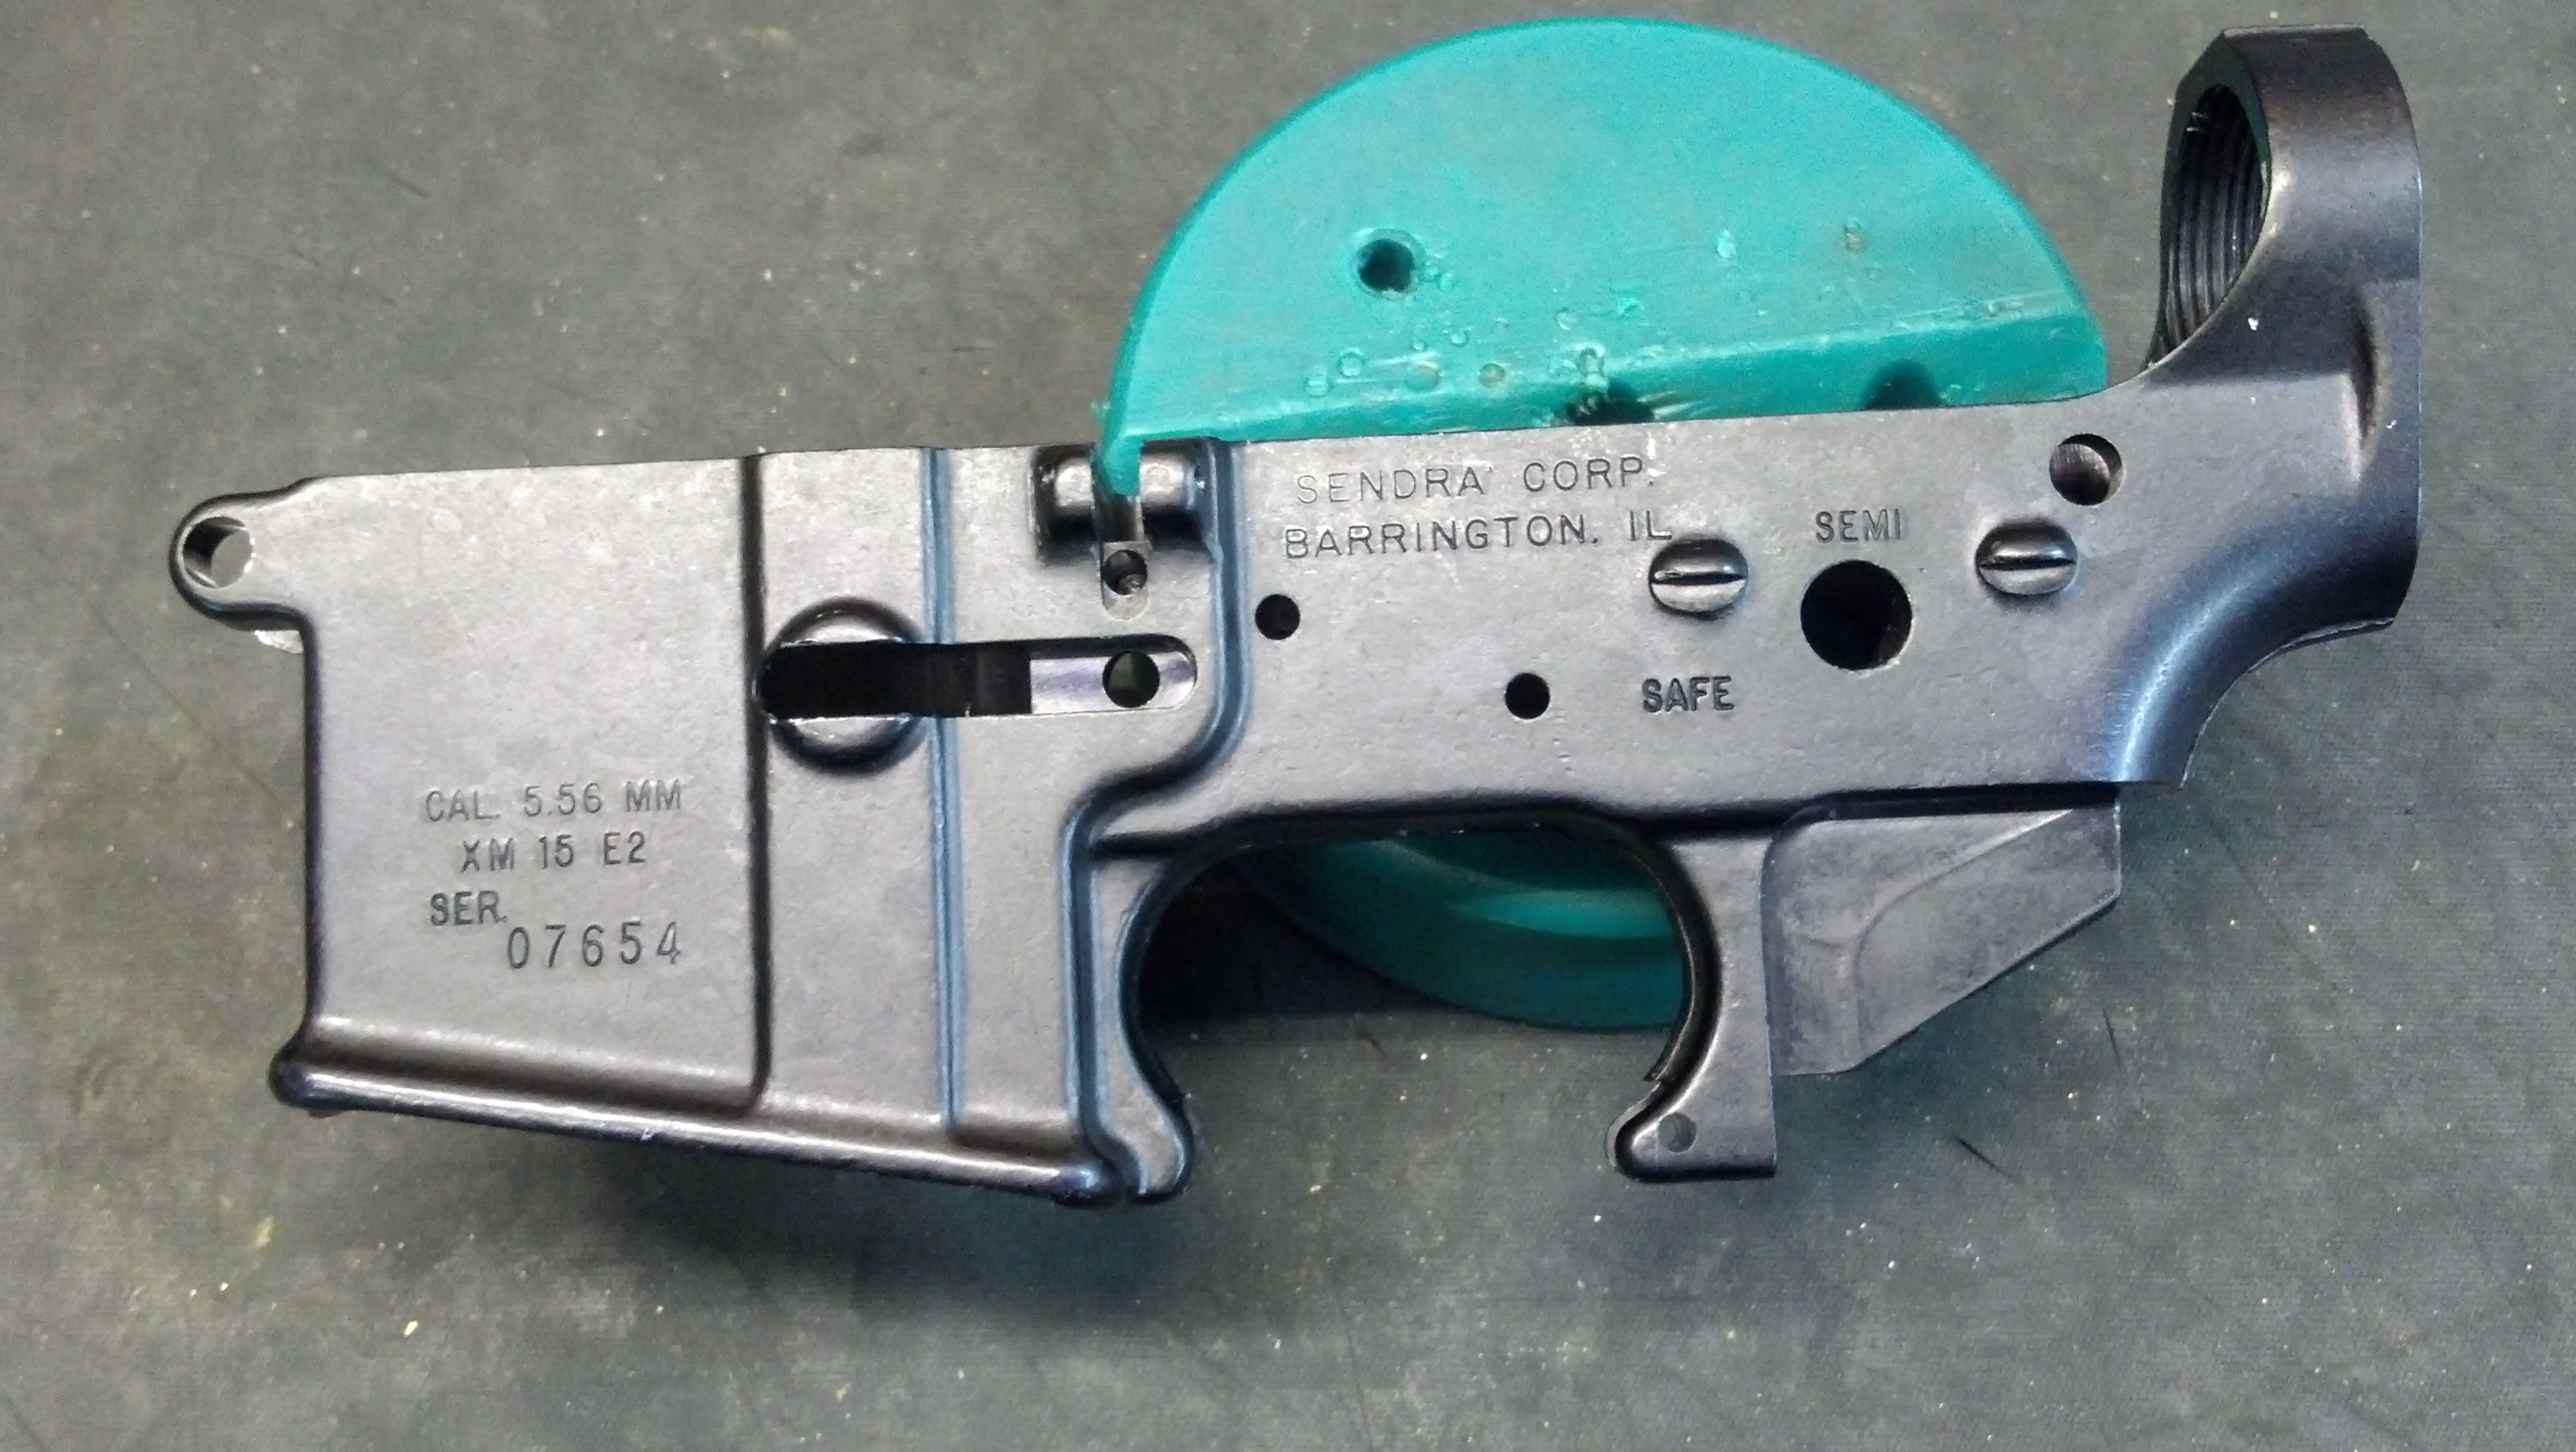 eagle arms serial number lookup